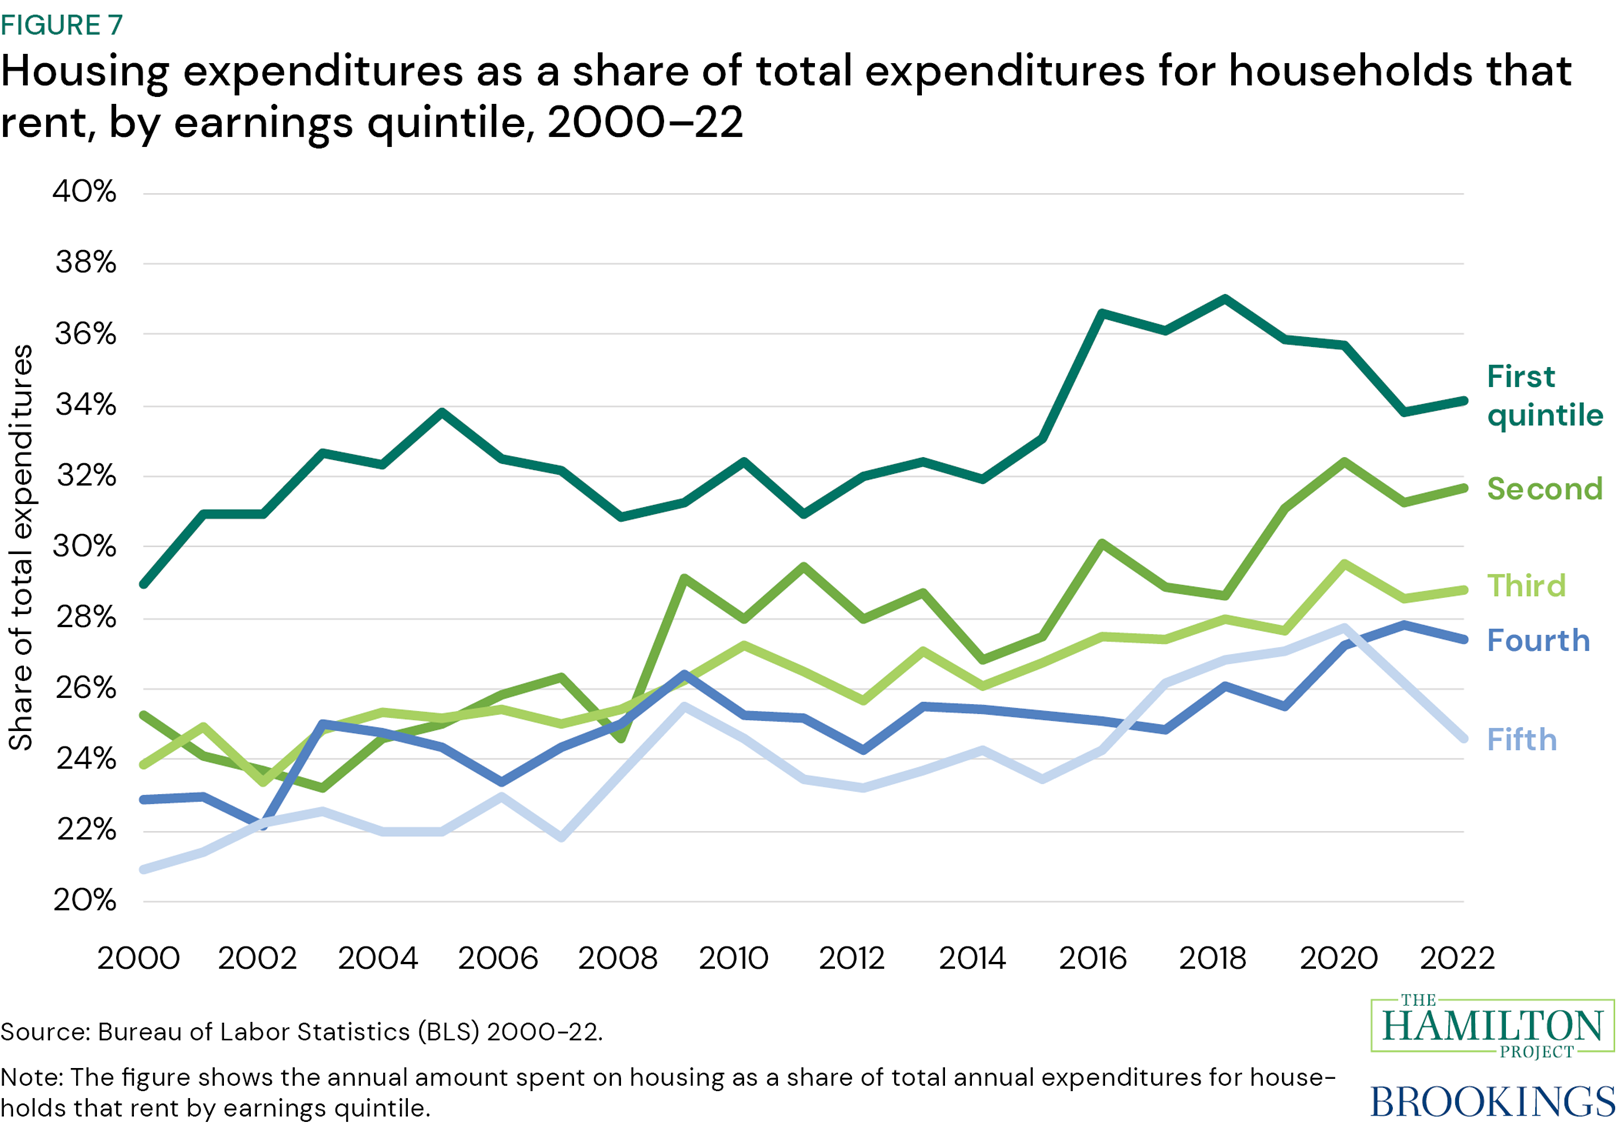 Figure 7: Housing expenditures as a share of total expenditures for households that rent, by earnings quintile, 2000–22. Figure 7 shows the share of total household expenditures spent on housing among renting households by earnings quintile over time. In broad strokes, over the past 20 years, renting households have allocated an increasing share of their expenditures on rent. The lowest fifth of earners (first quintile) consistently spend the highest share.